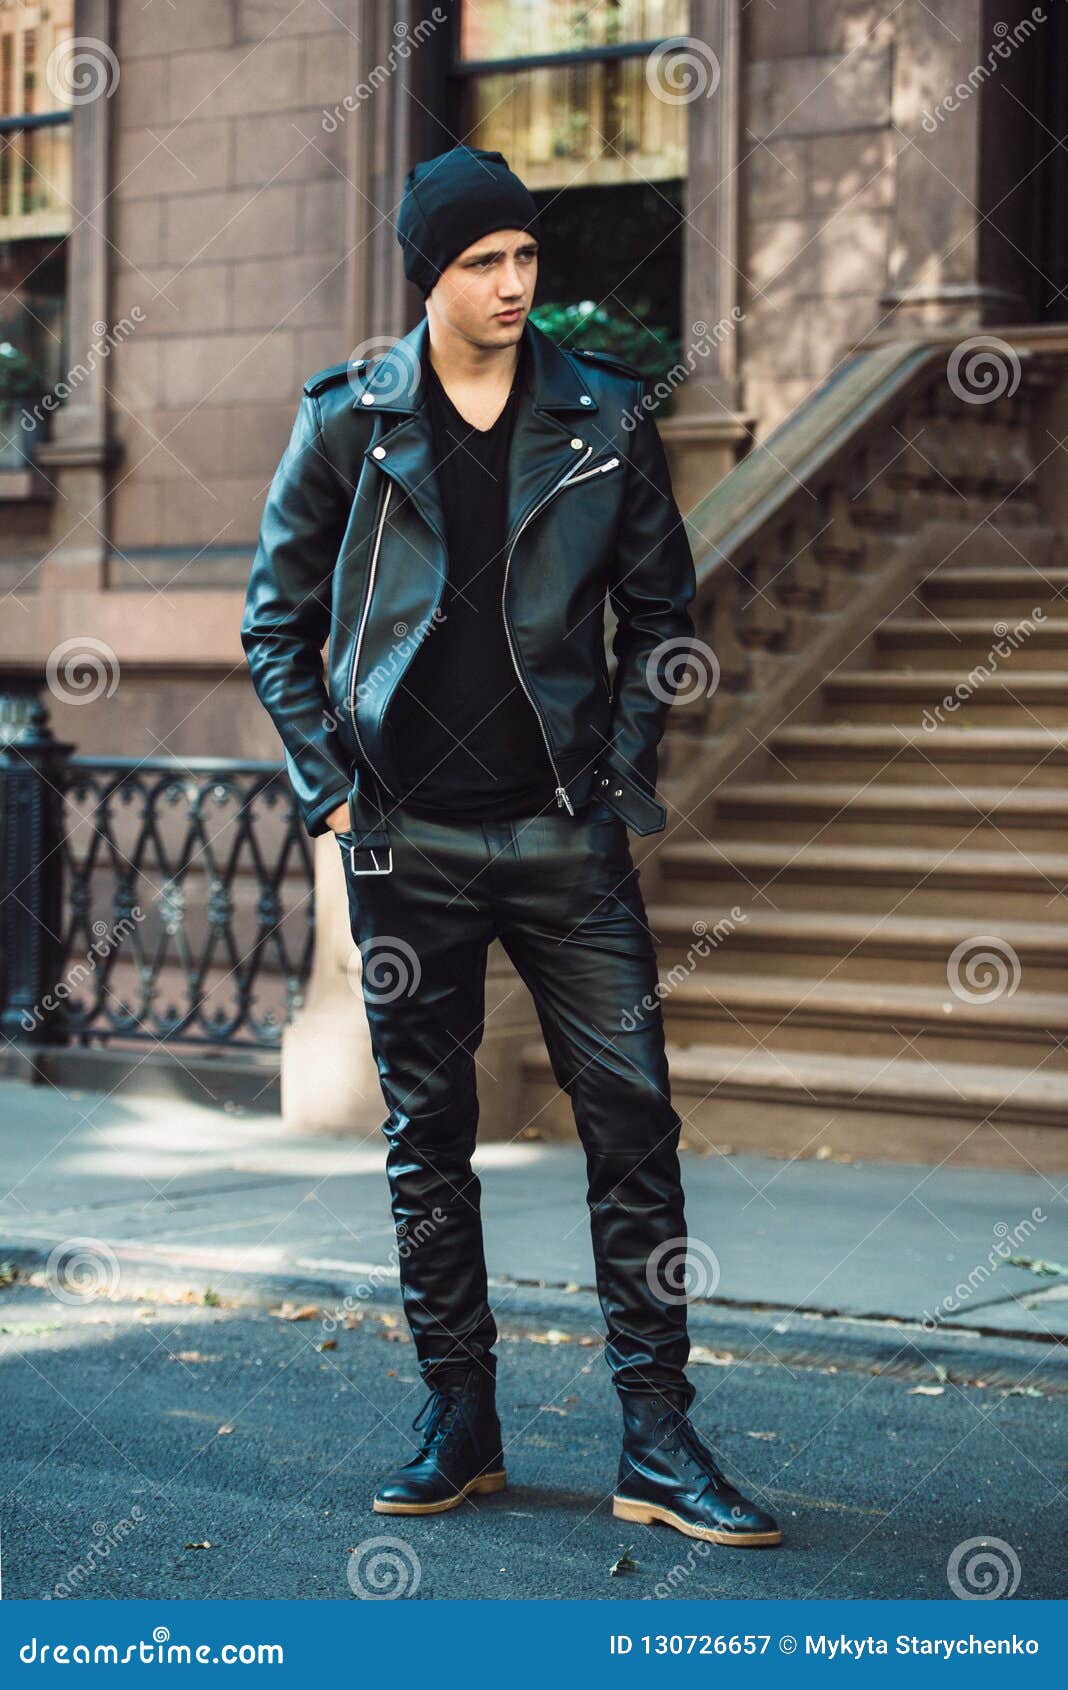 Hipster Man Wearing Black Style Leather Outfit with Hat, Pants, Jacket and  Shoes Standing on City Street. Stock Image - Image of brunet, face:  130726657